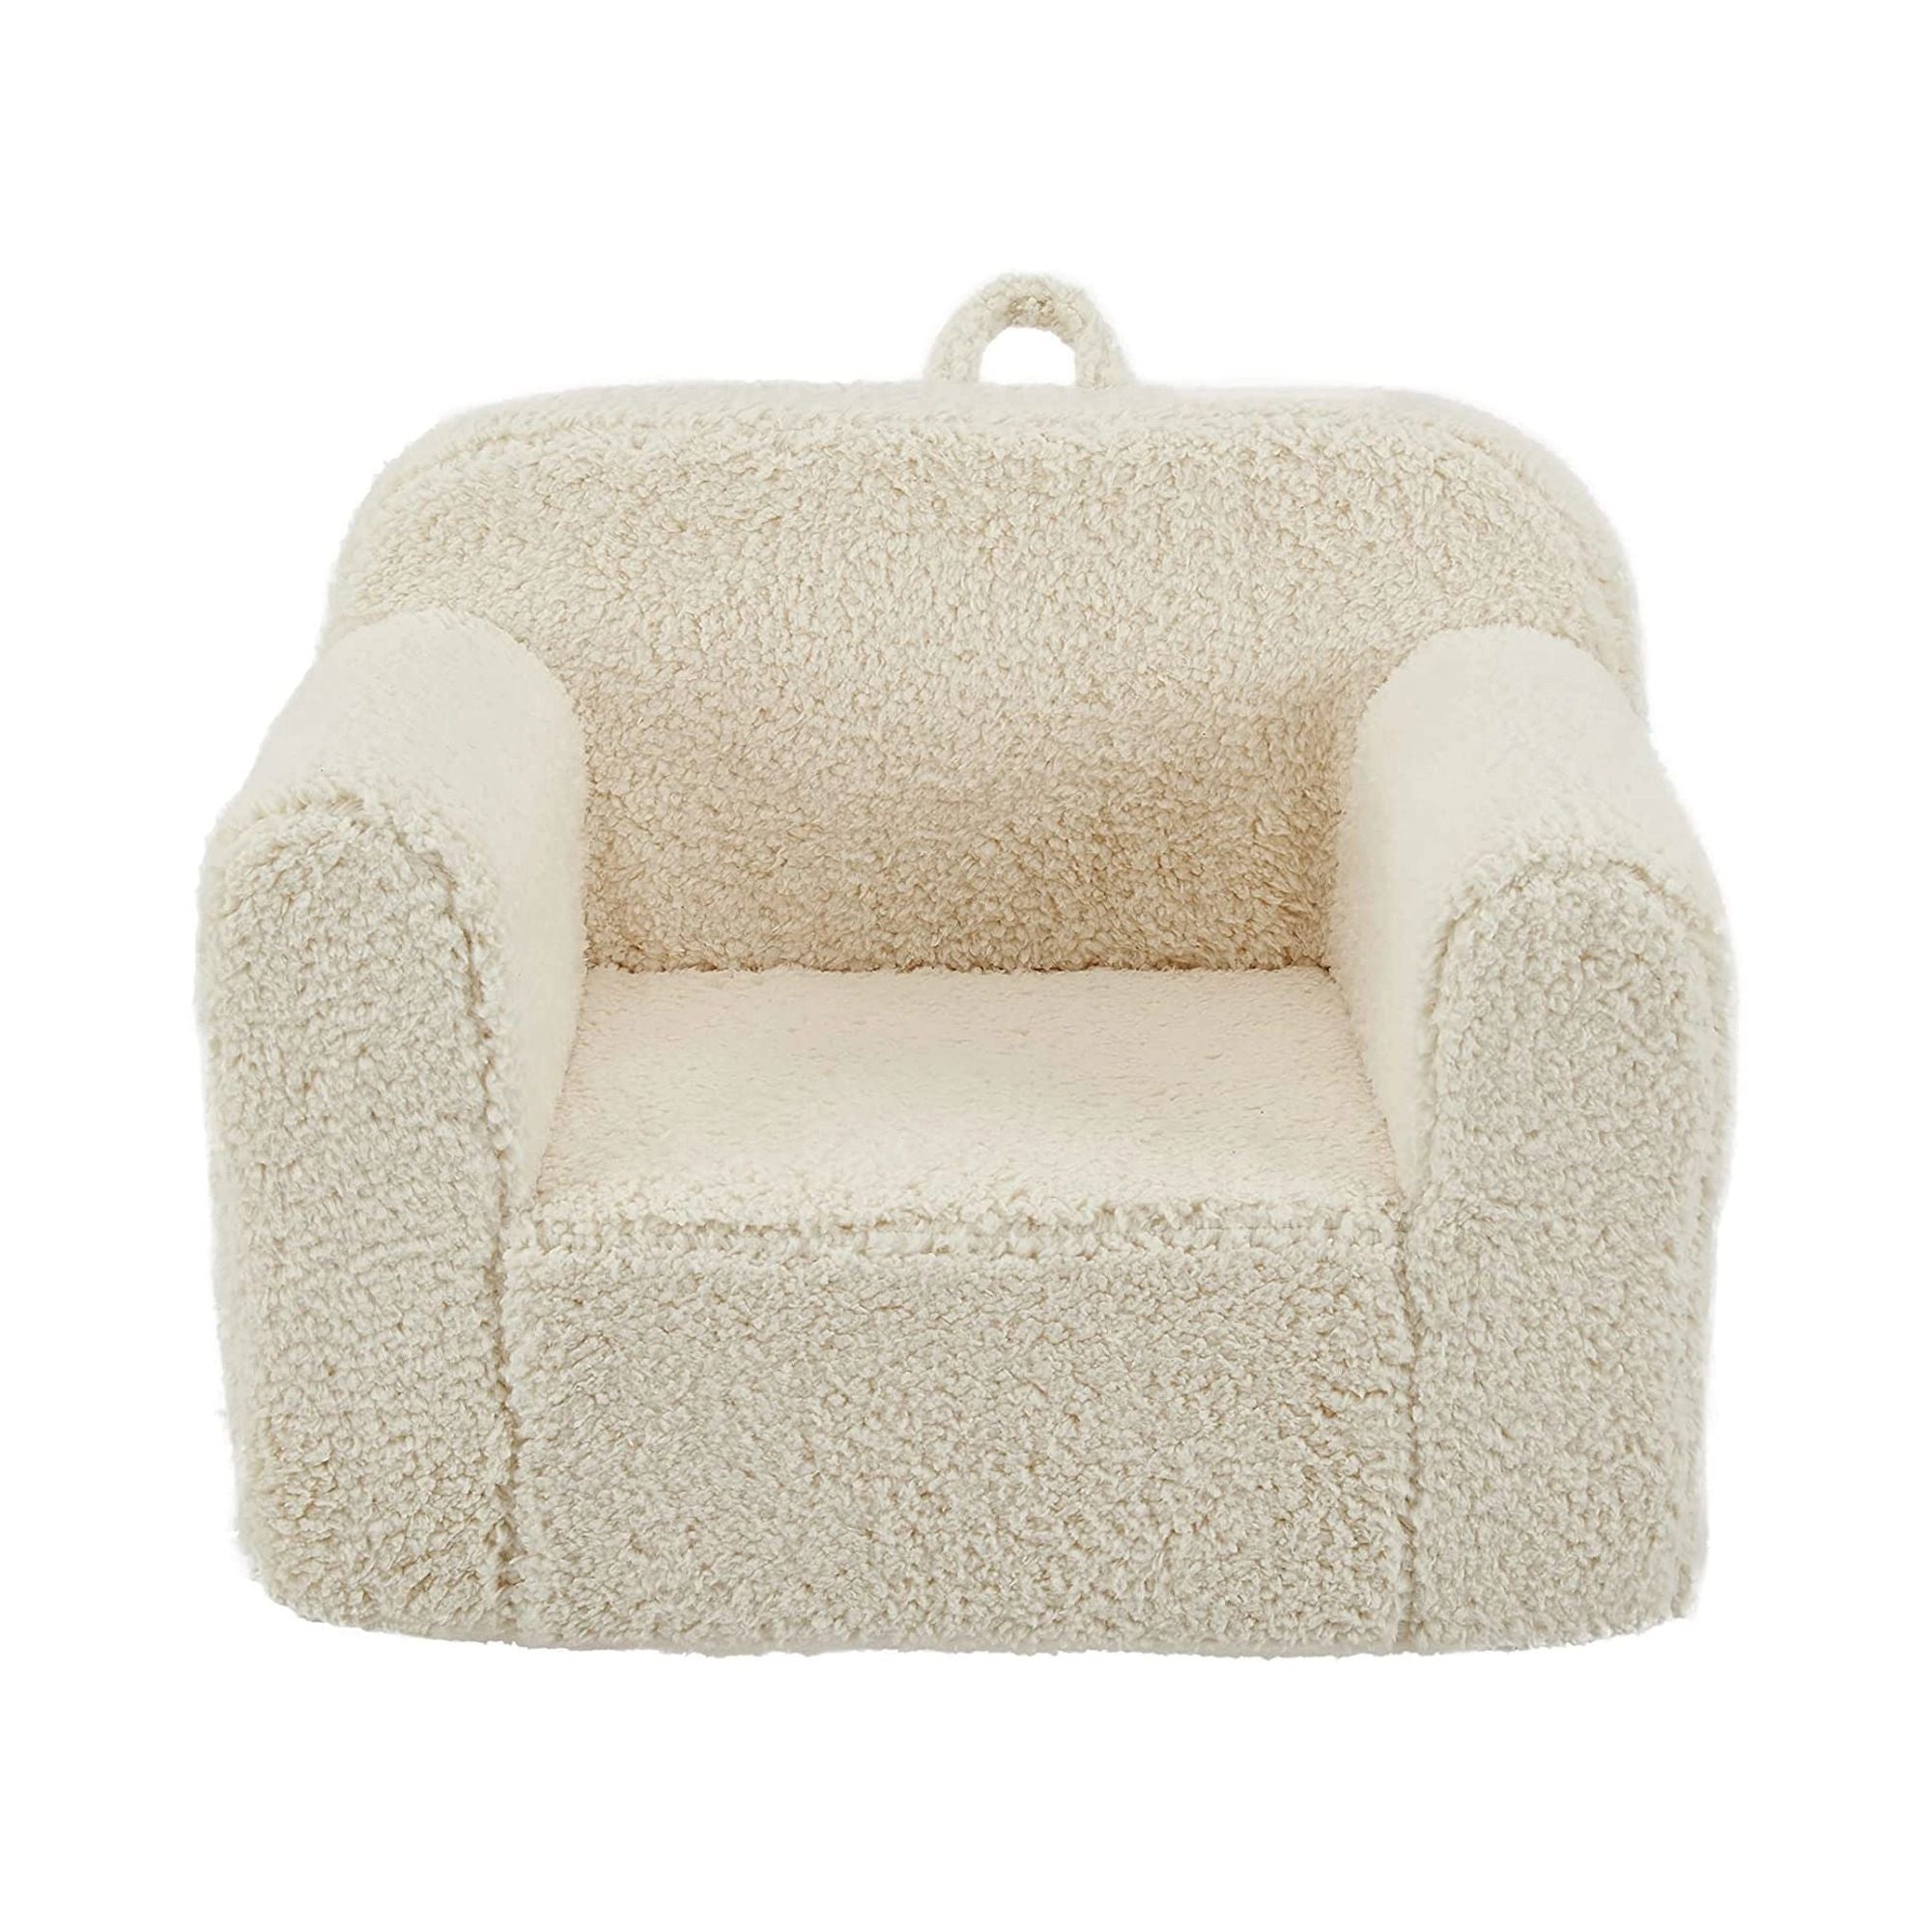 Kids Armchair Toddler Couch Baby Sofa Chair with Sherpa Fabric for Boys and Girls (Beige)